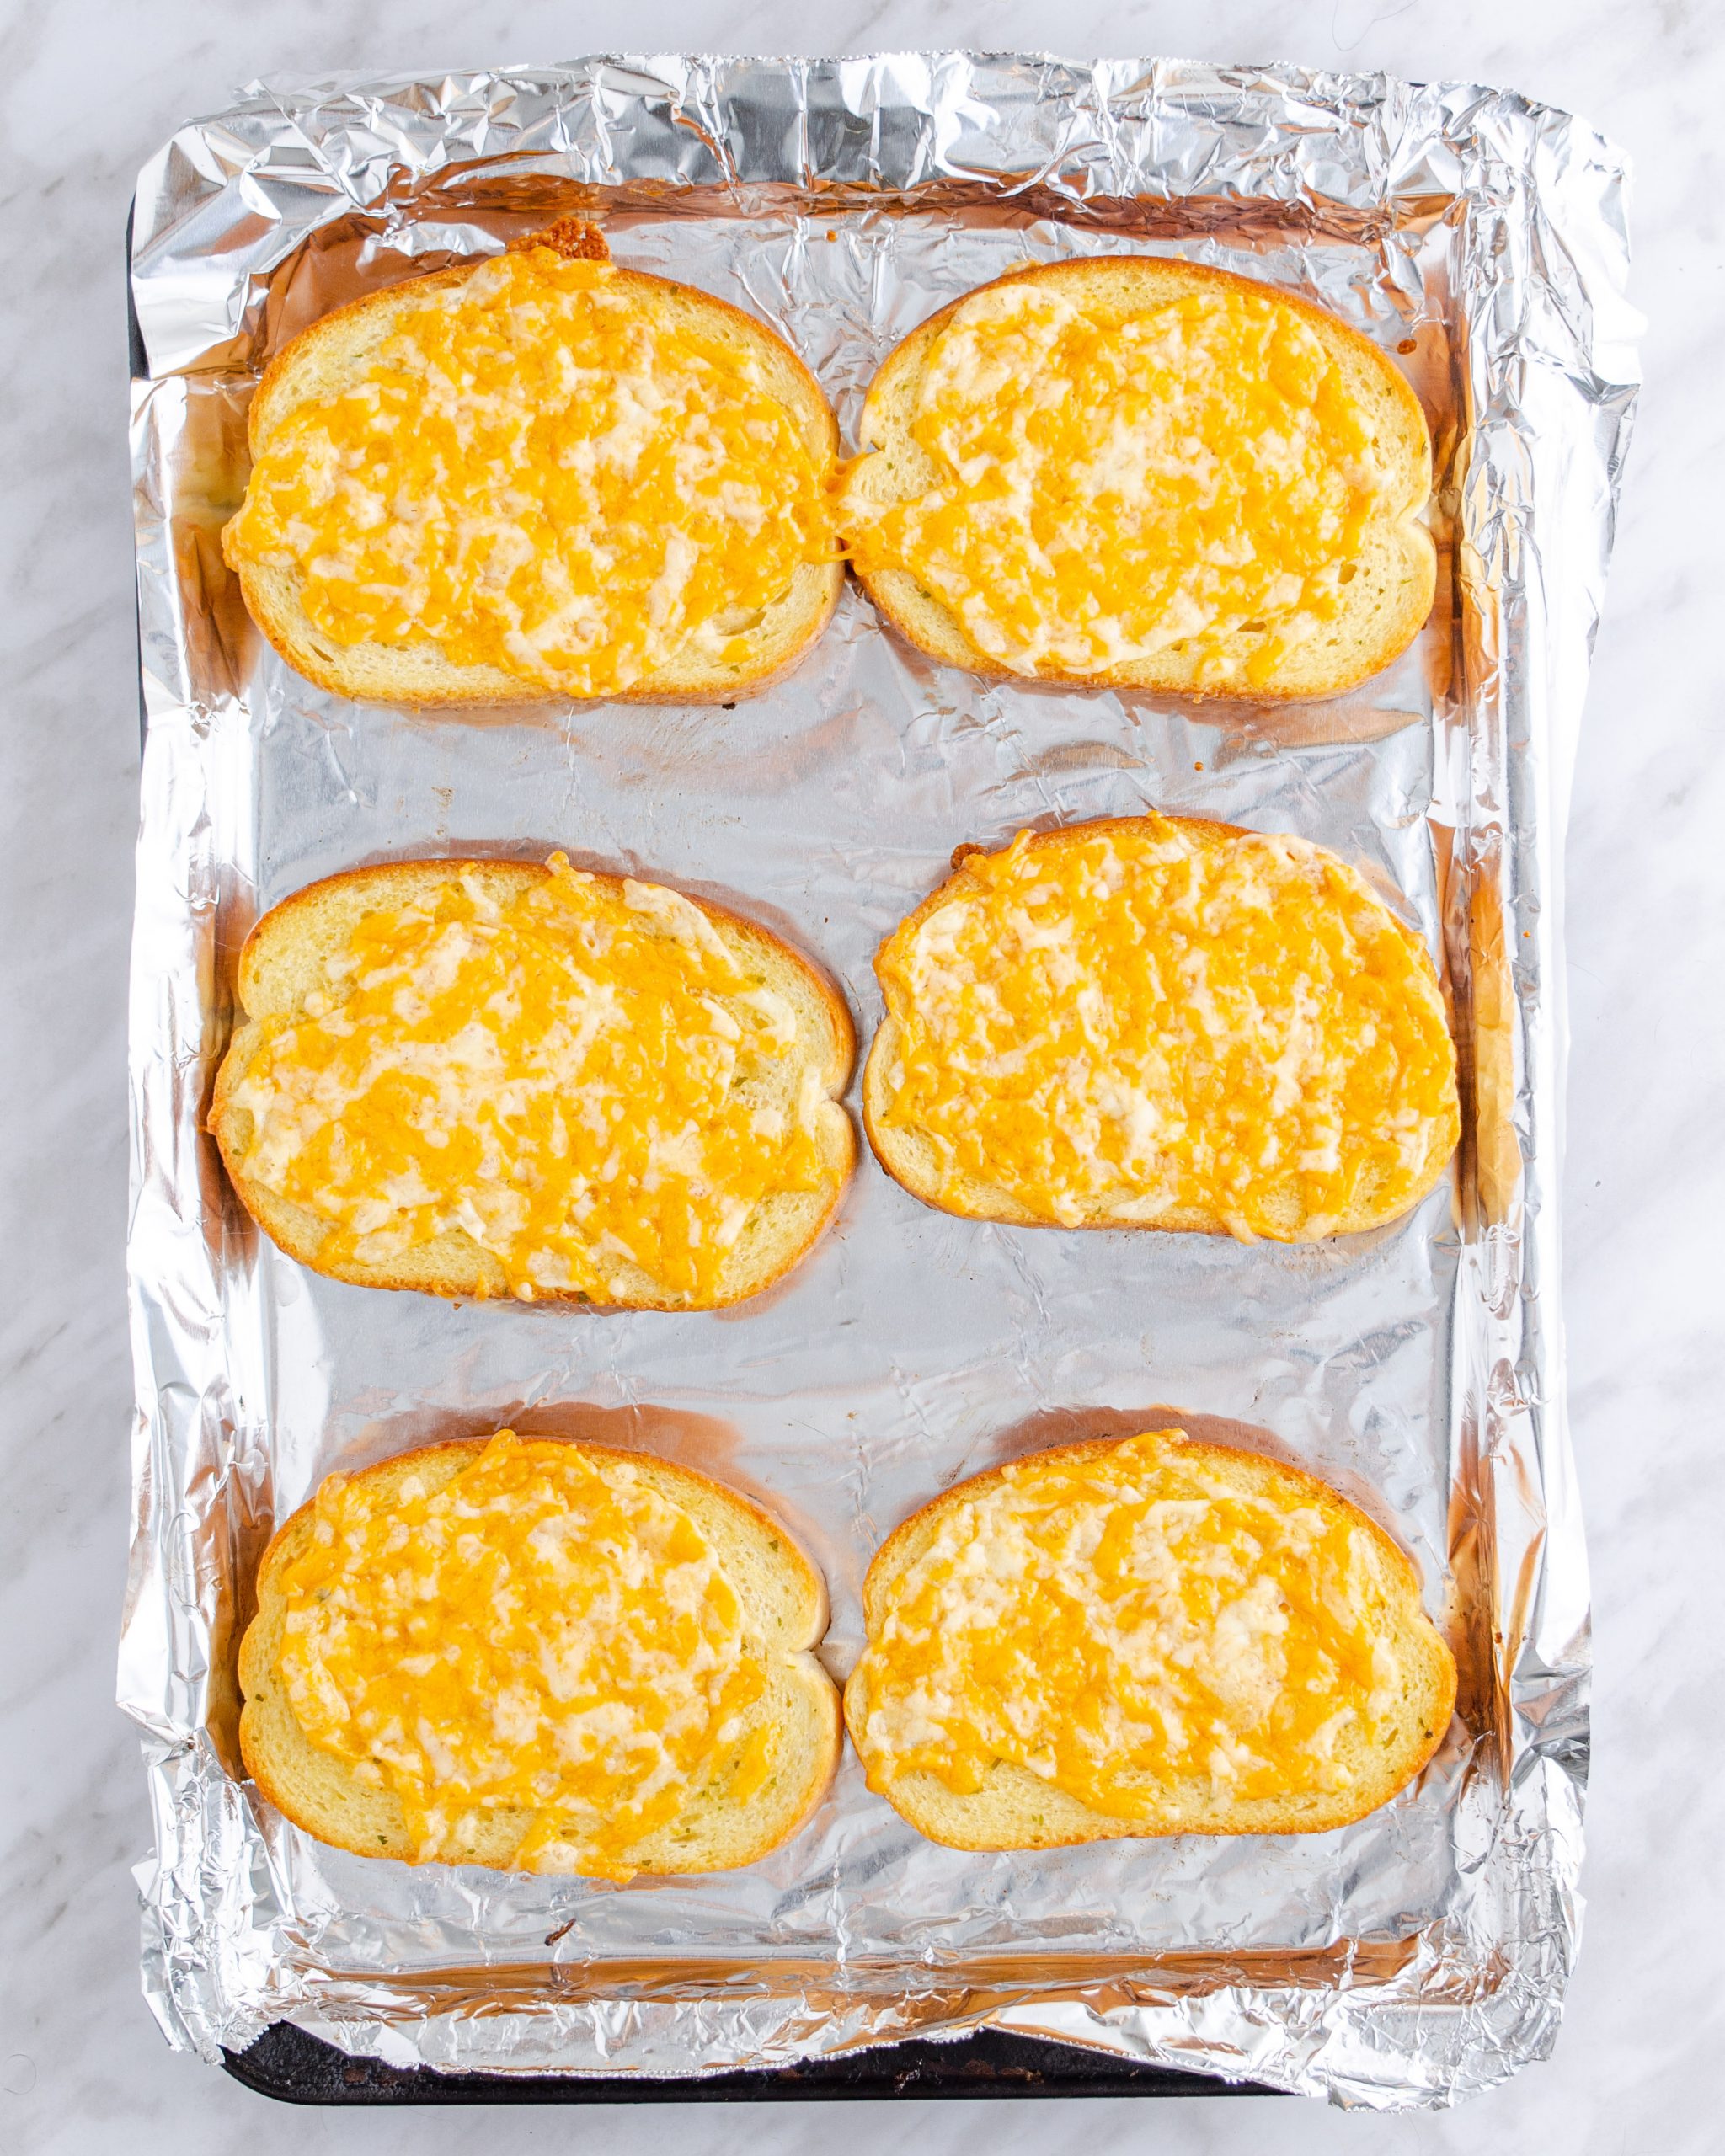 Bake the garlic cheese bread according to package instructions and let cool.